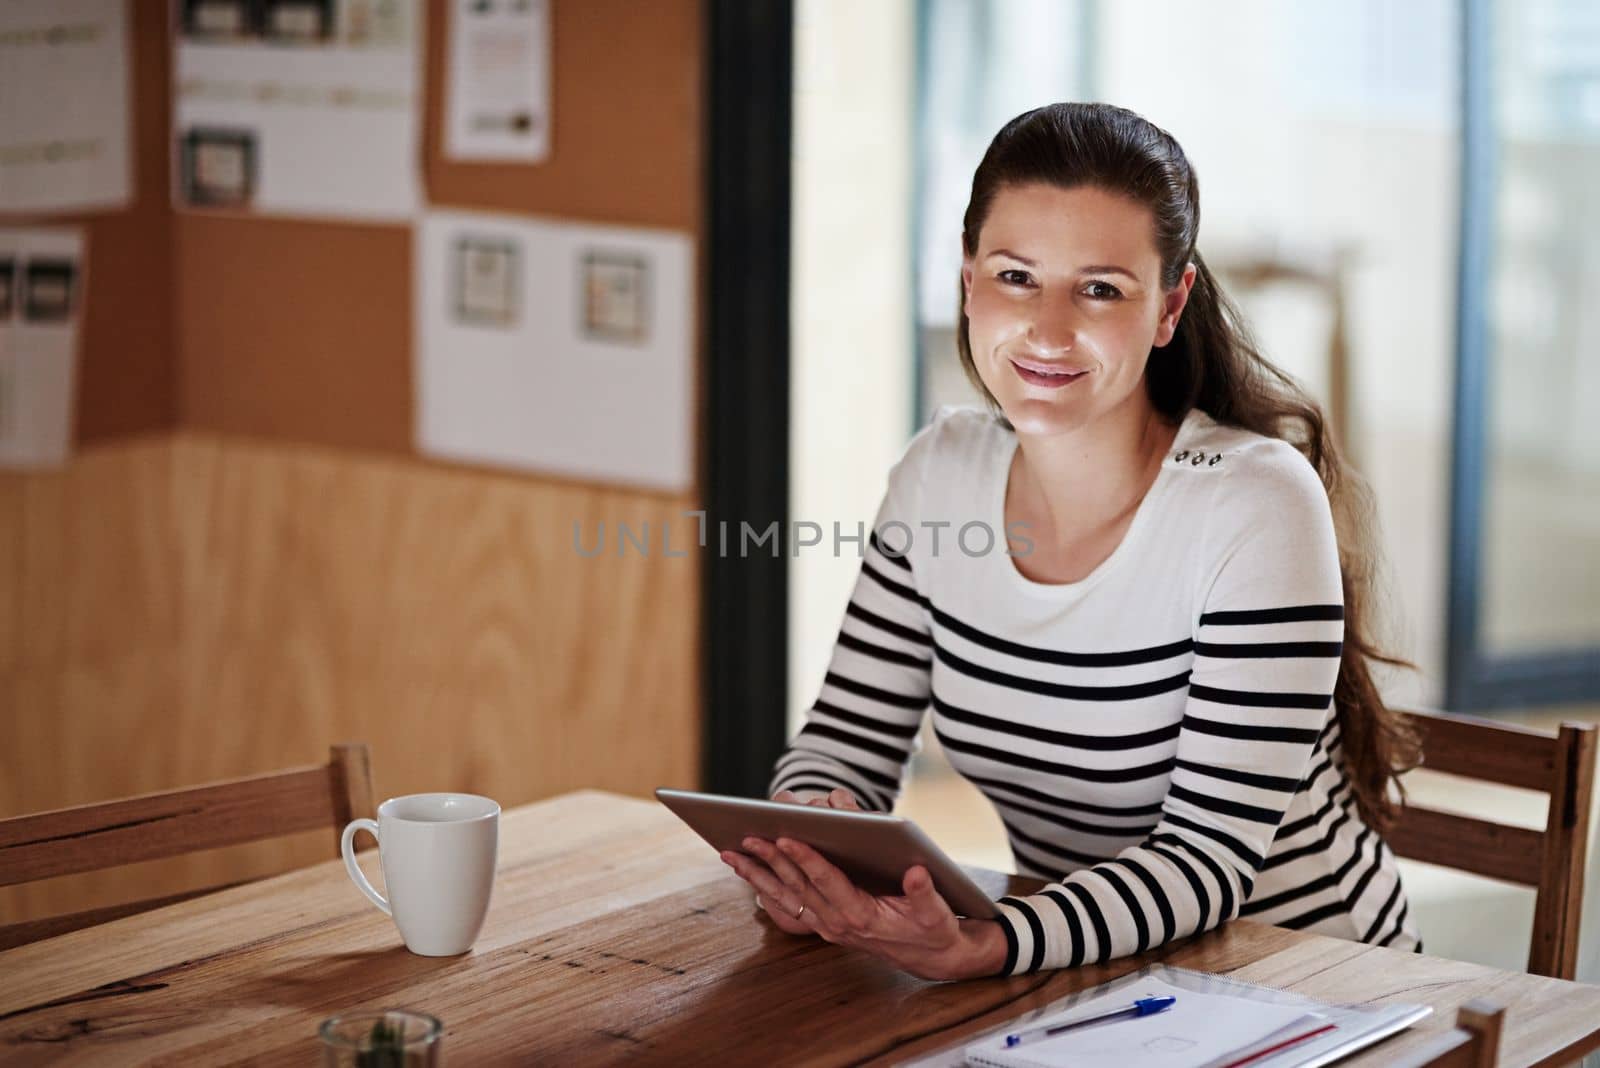 Staying connected in todays business world. Portrait of a young businesswoman using a digital tablet in an office